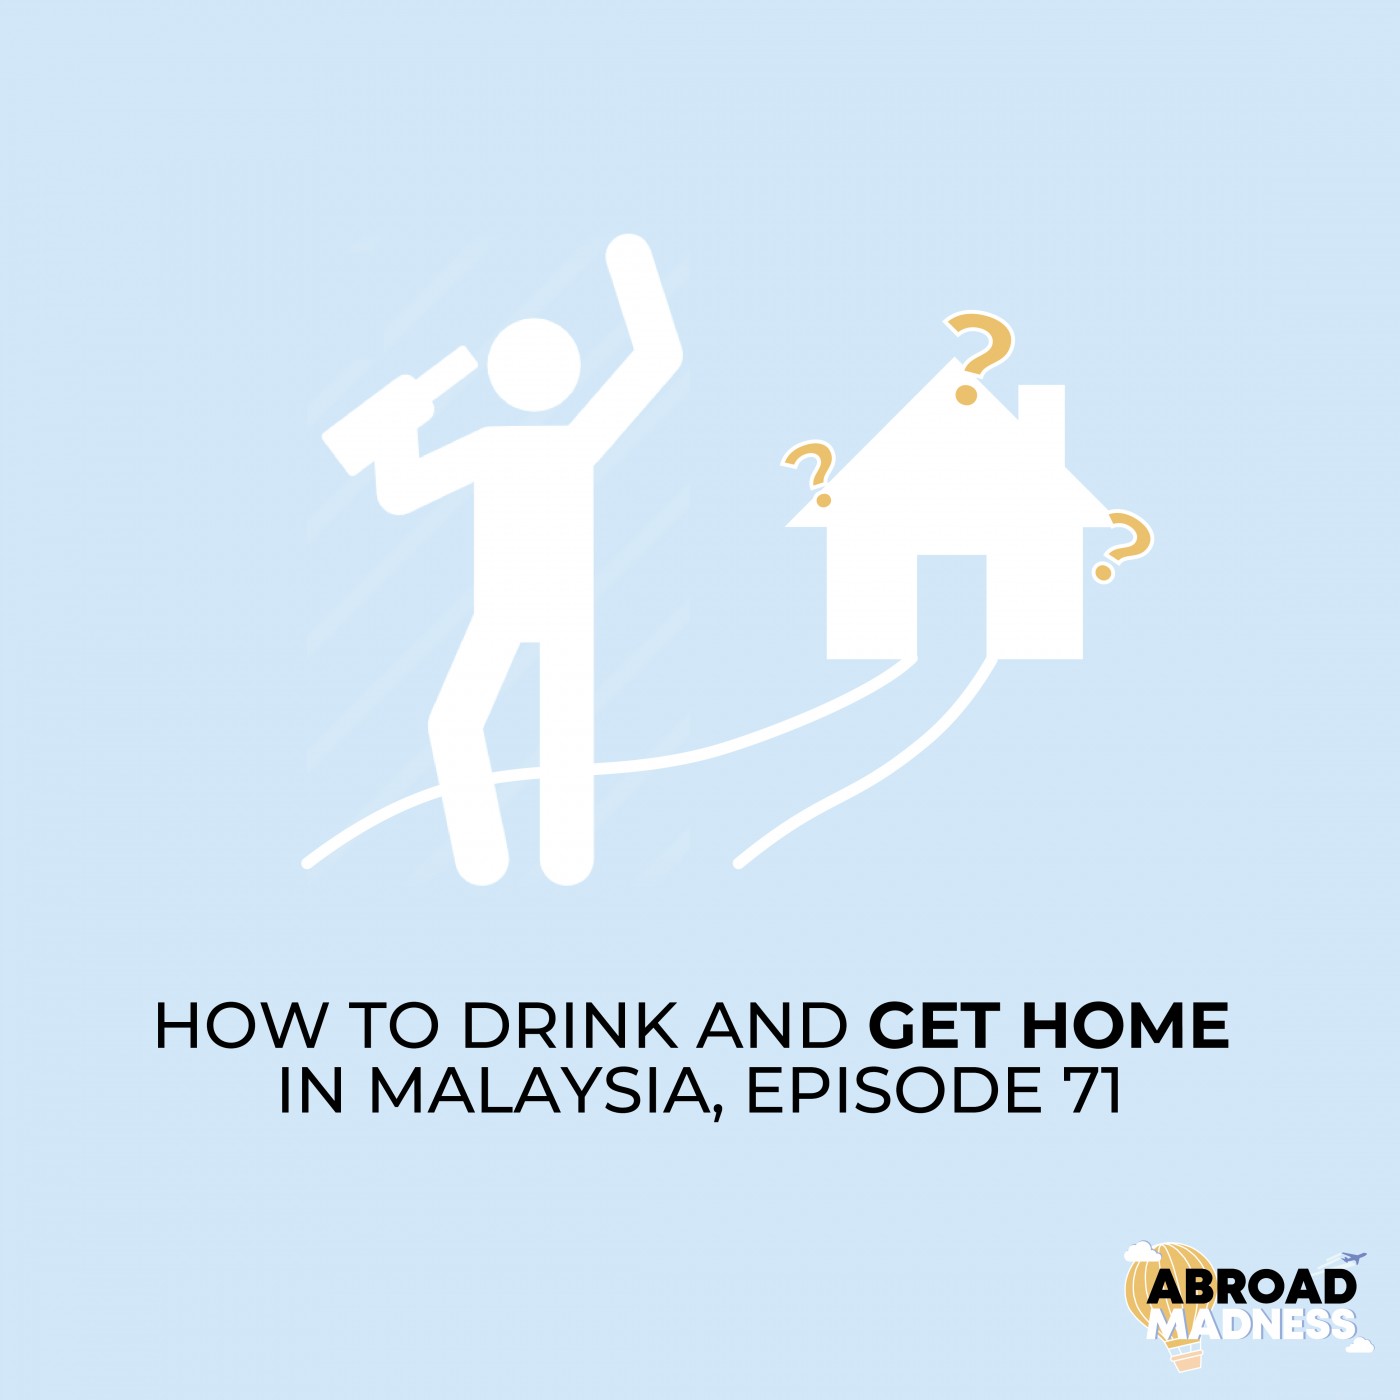 How to drink and get home in Malaysia, Episode 71